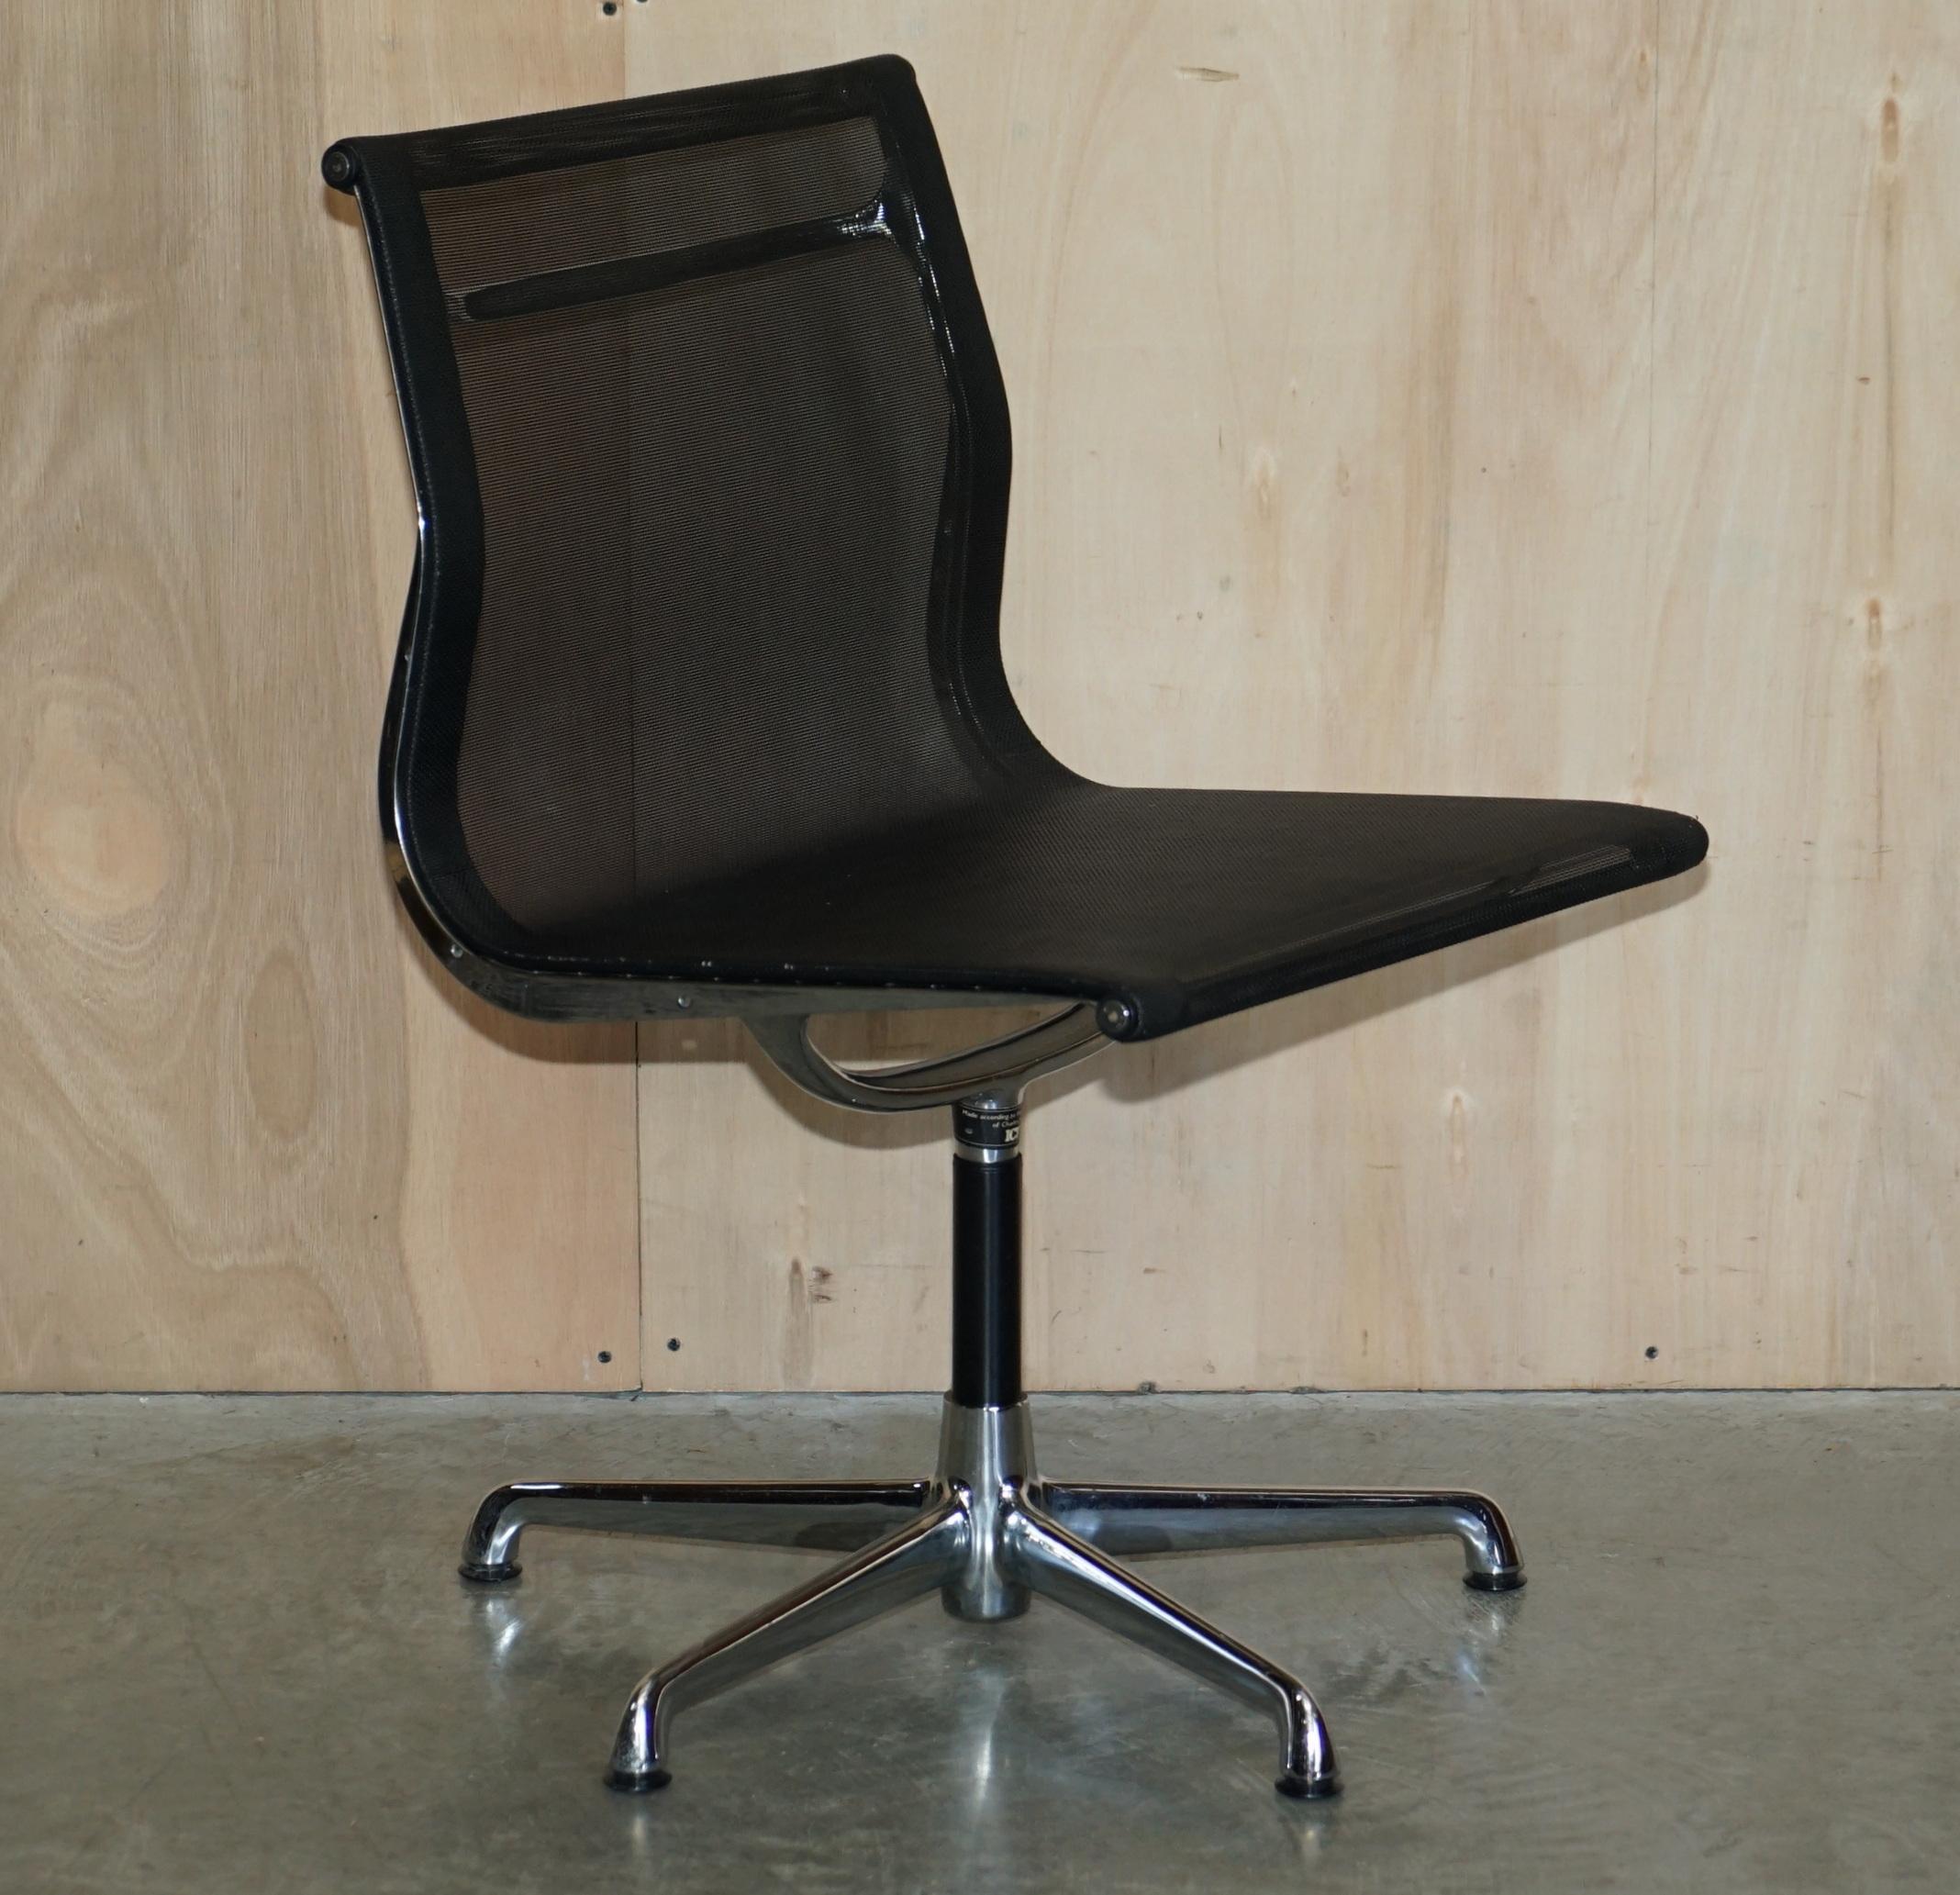 We are delighted to offer for sale 1 of 4 original fully stamped ICF for Charles Eames, EA105 Hopsak chrome swivel armchairs RRP £2,096 each.

Super iconic, award winning, what more can you say, these are pretty much the most comfortable office